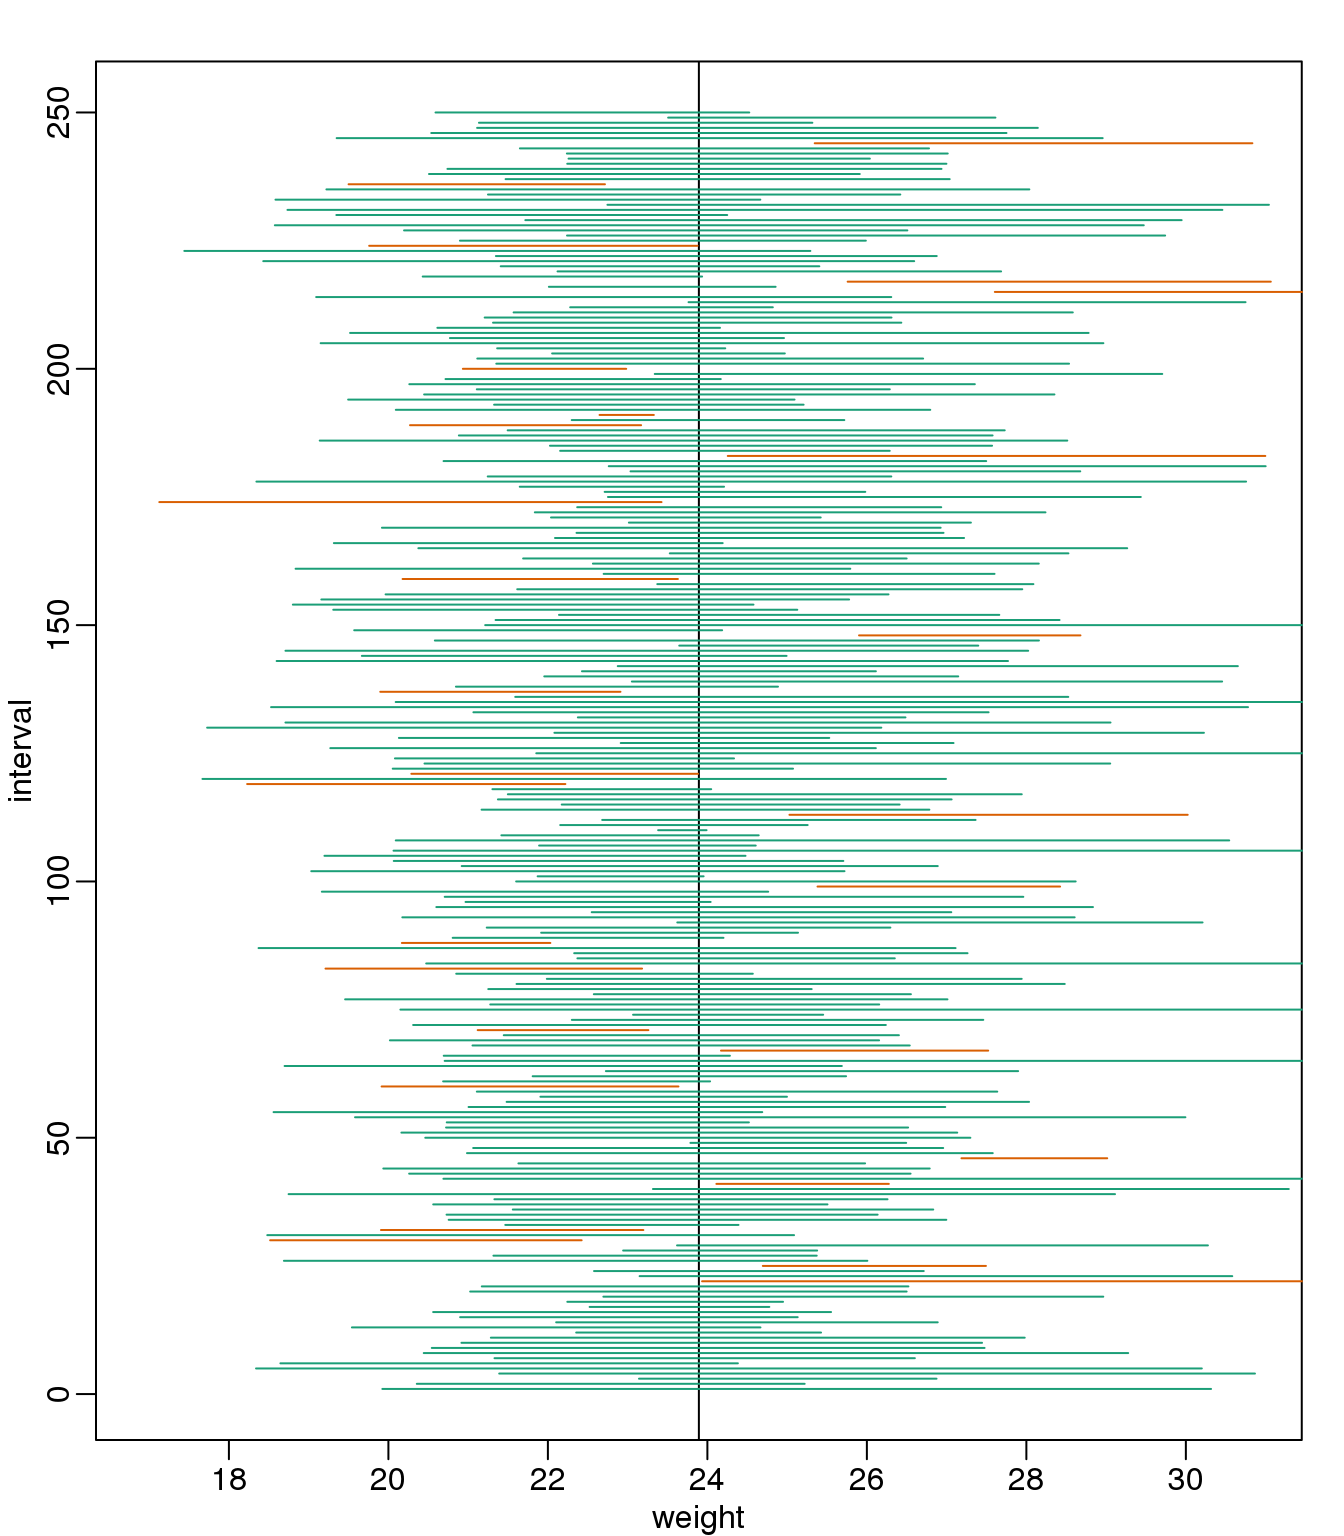 We show 250 random realizations of 95% confidence intervals, but now for a smaller sample size. The confidence interval is based on the CLT approximation. The color denotes if the interval fell on the parameter or not.